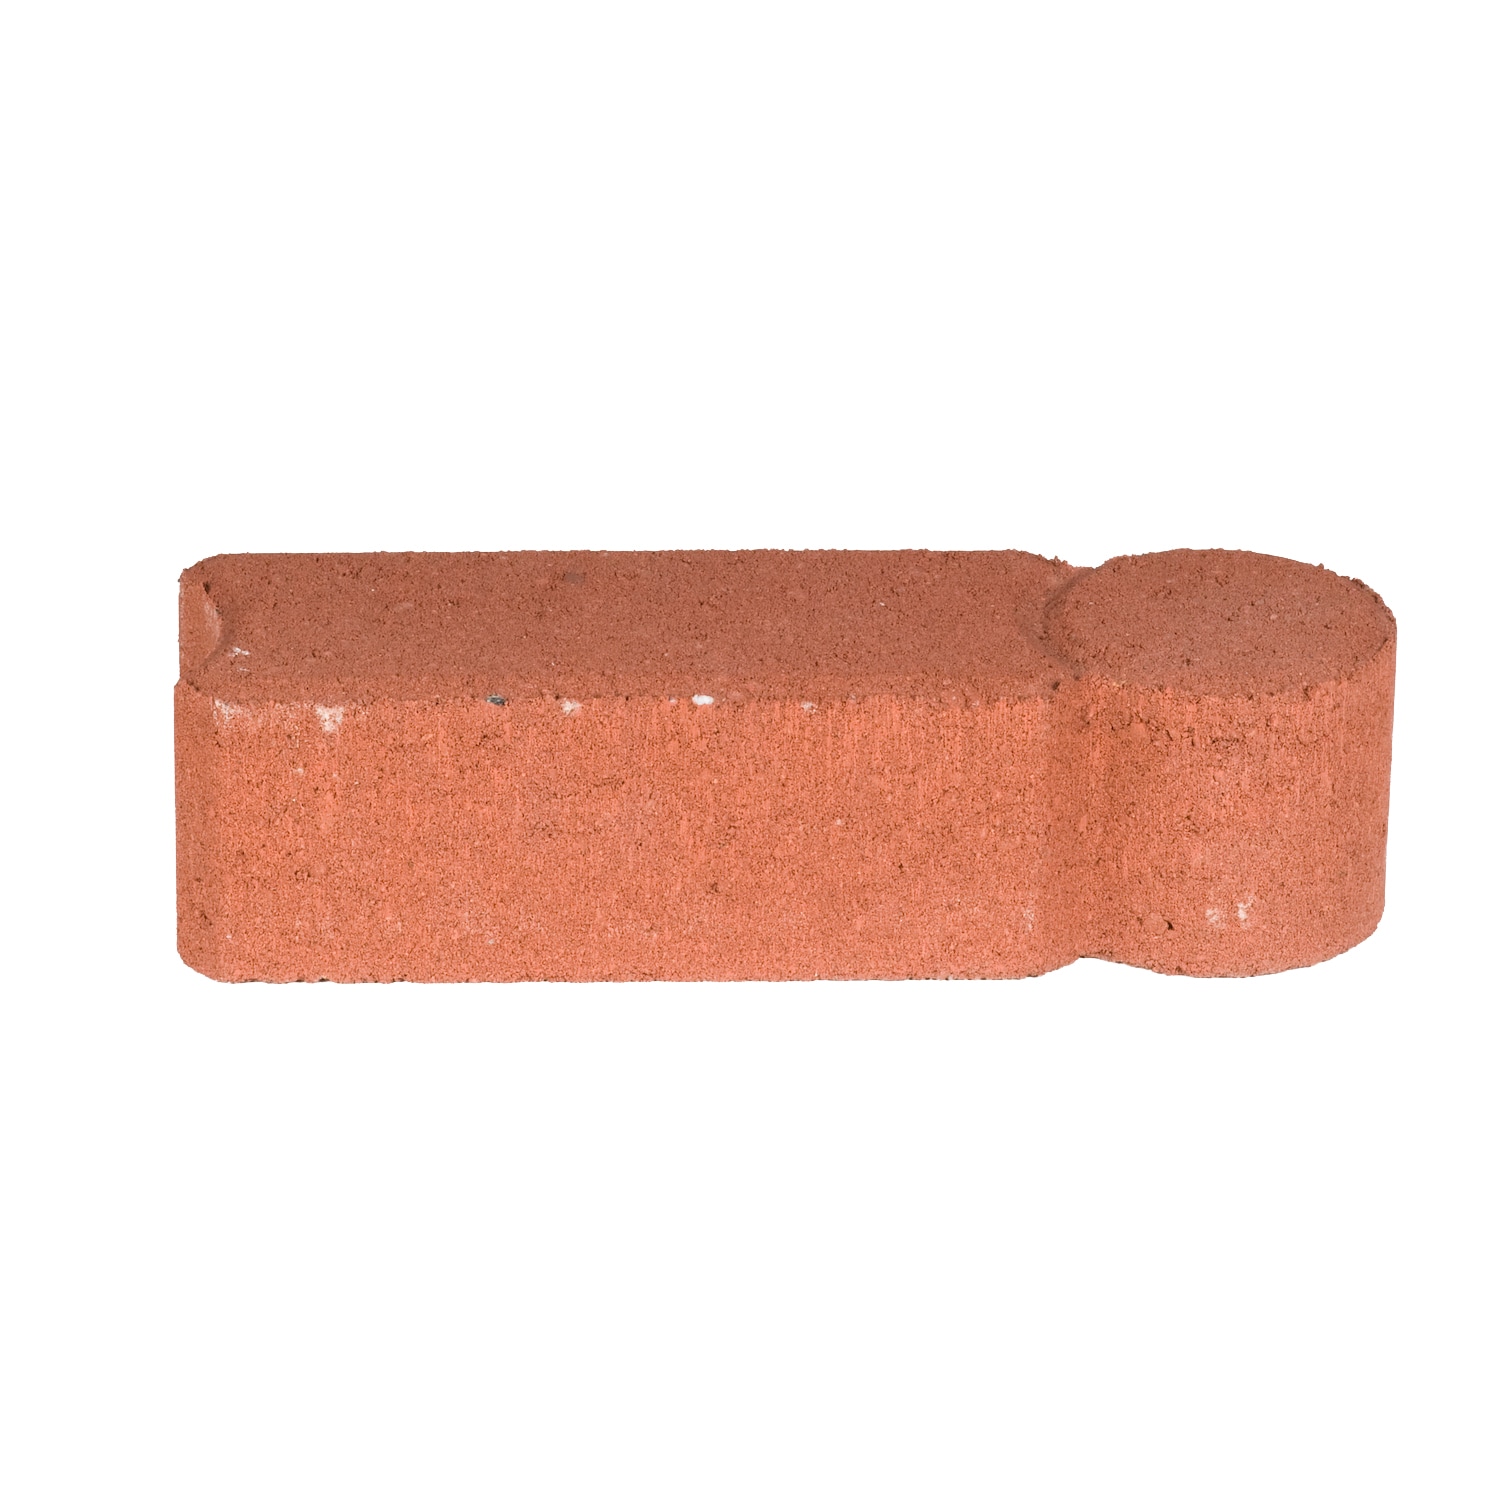 Geometric 12-in L x 4-in W x 3-in H Red Concrete Straight Edging Stone | - Lowe's 102604201